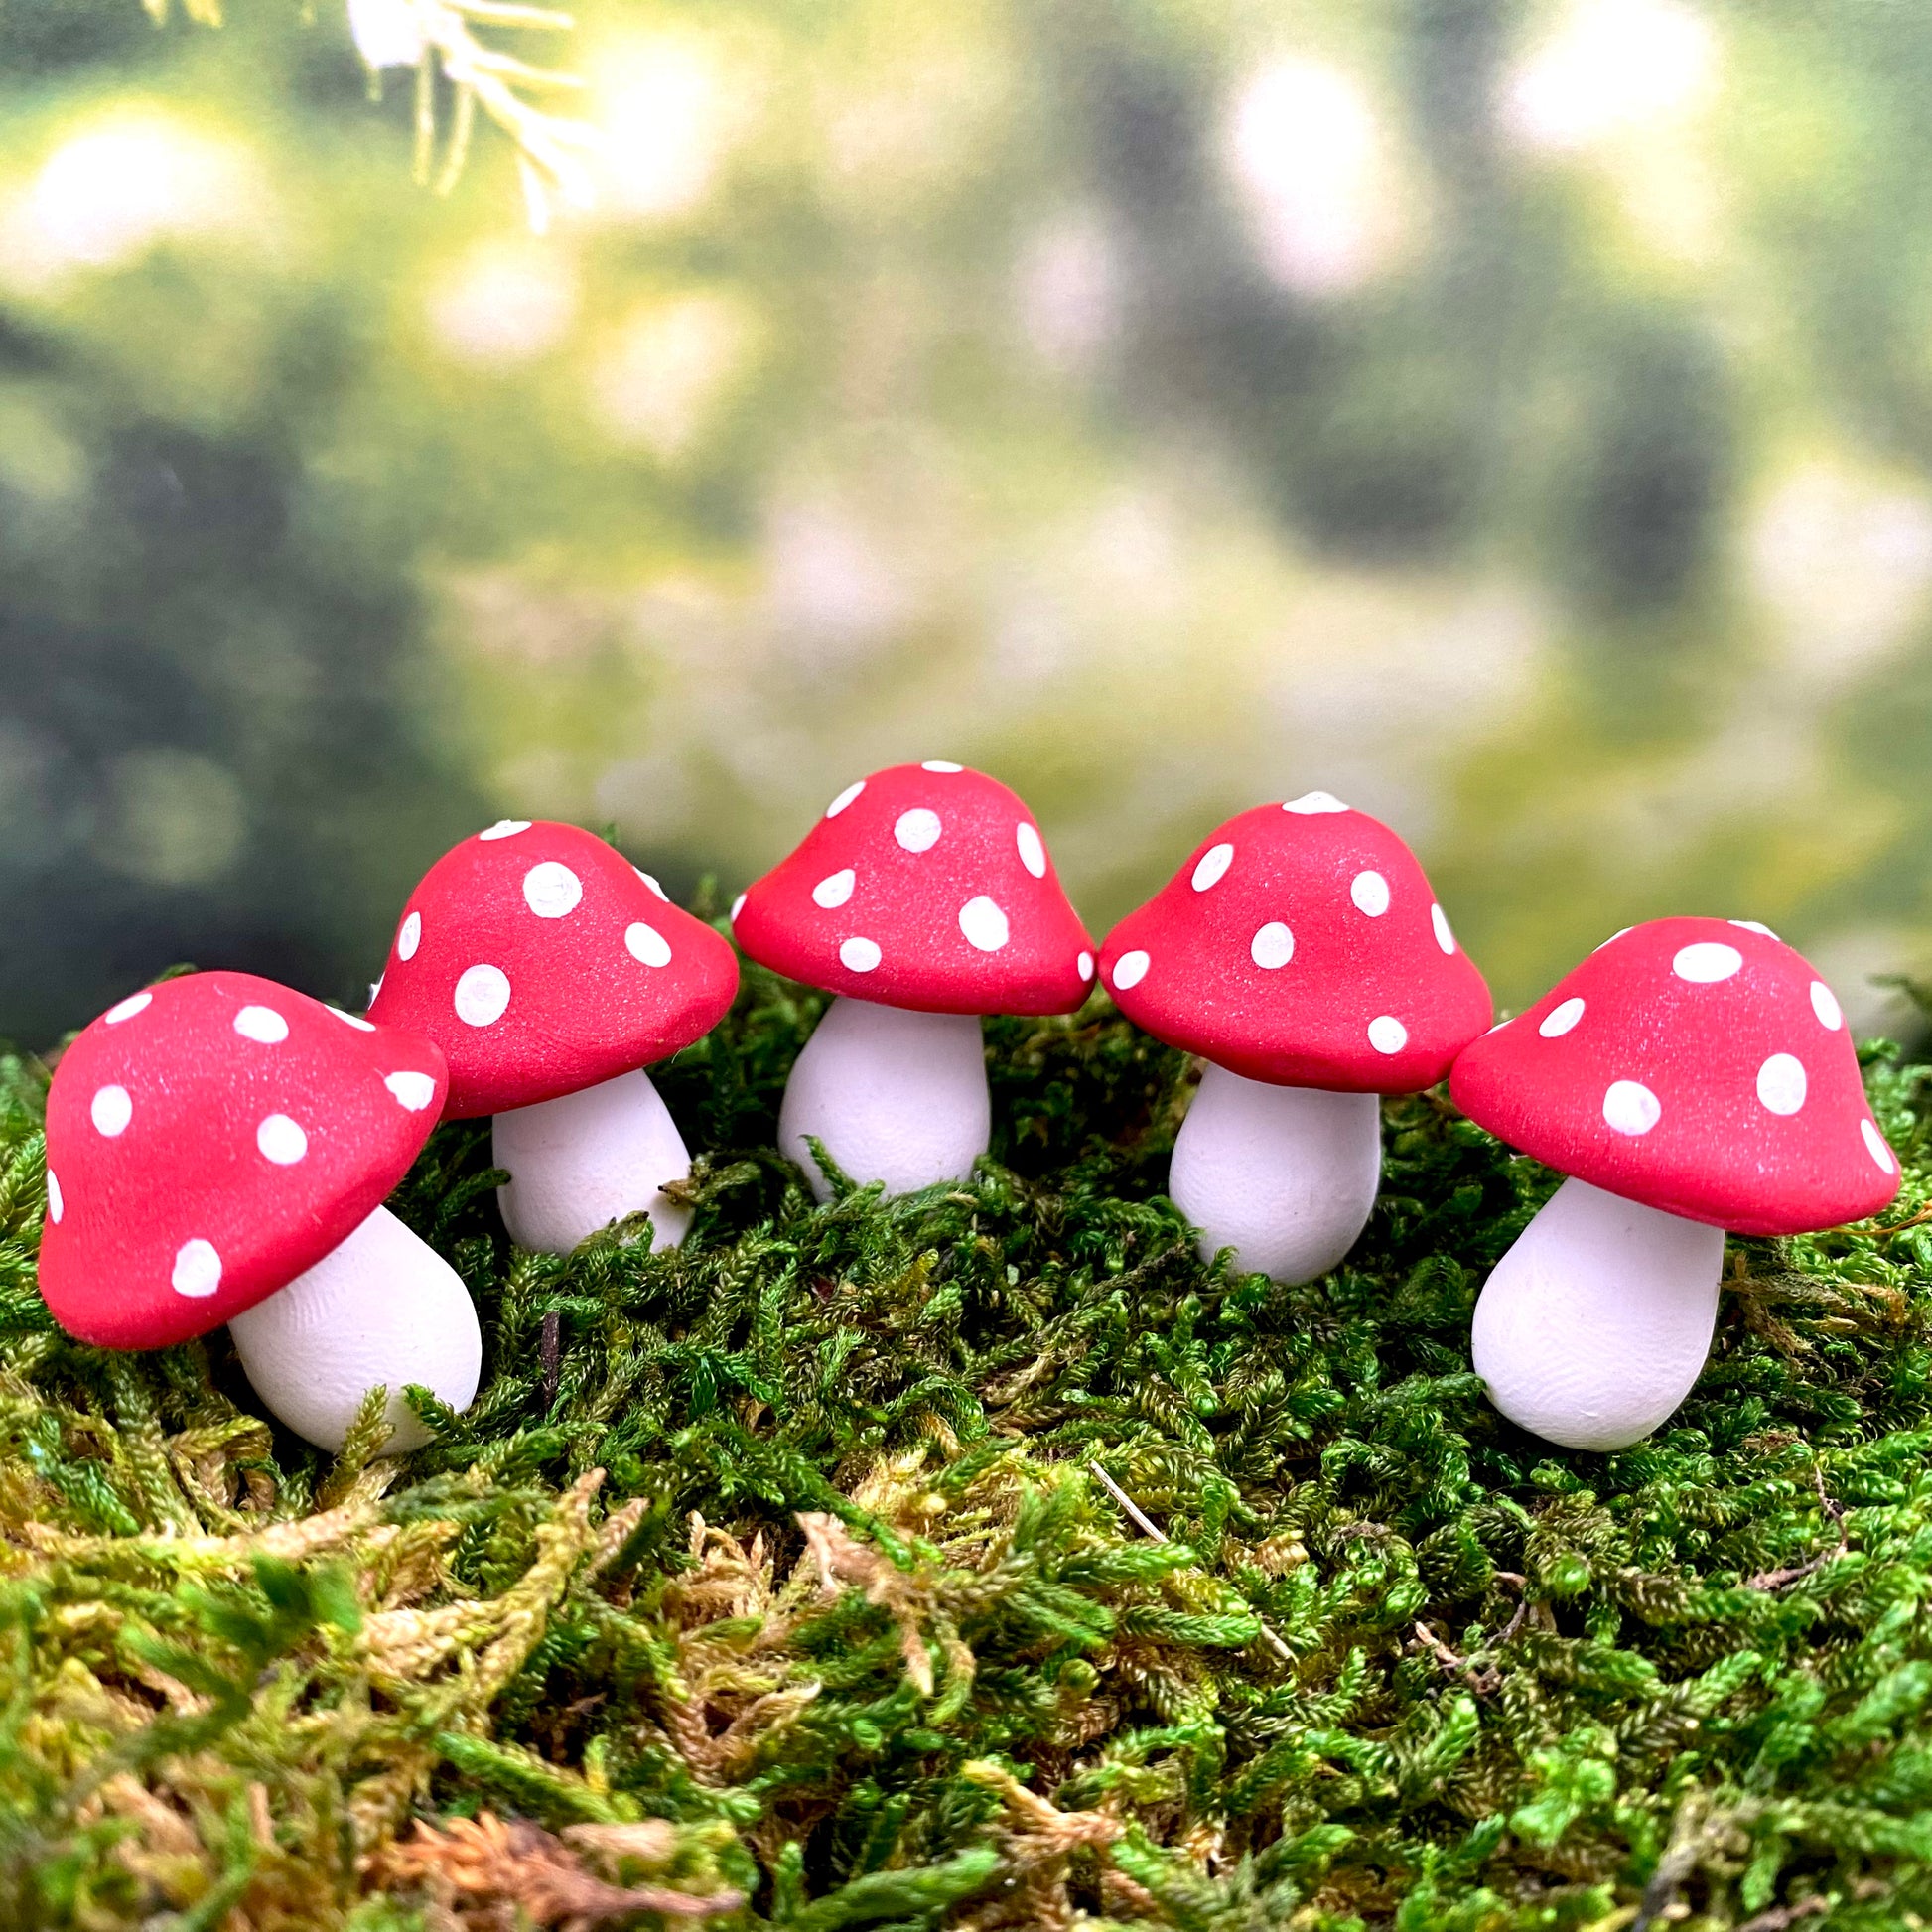 Fairy Garden Button Top Red and White Toadstools, Australian Fairy Gardens, Mushrooms